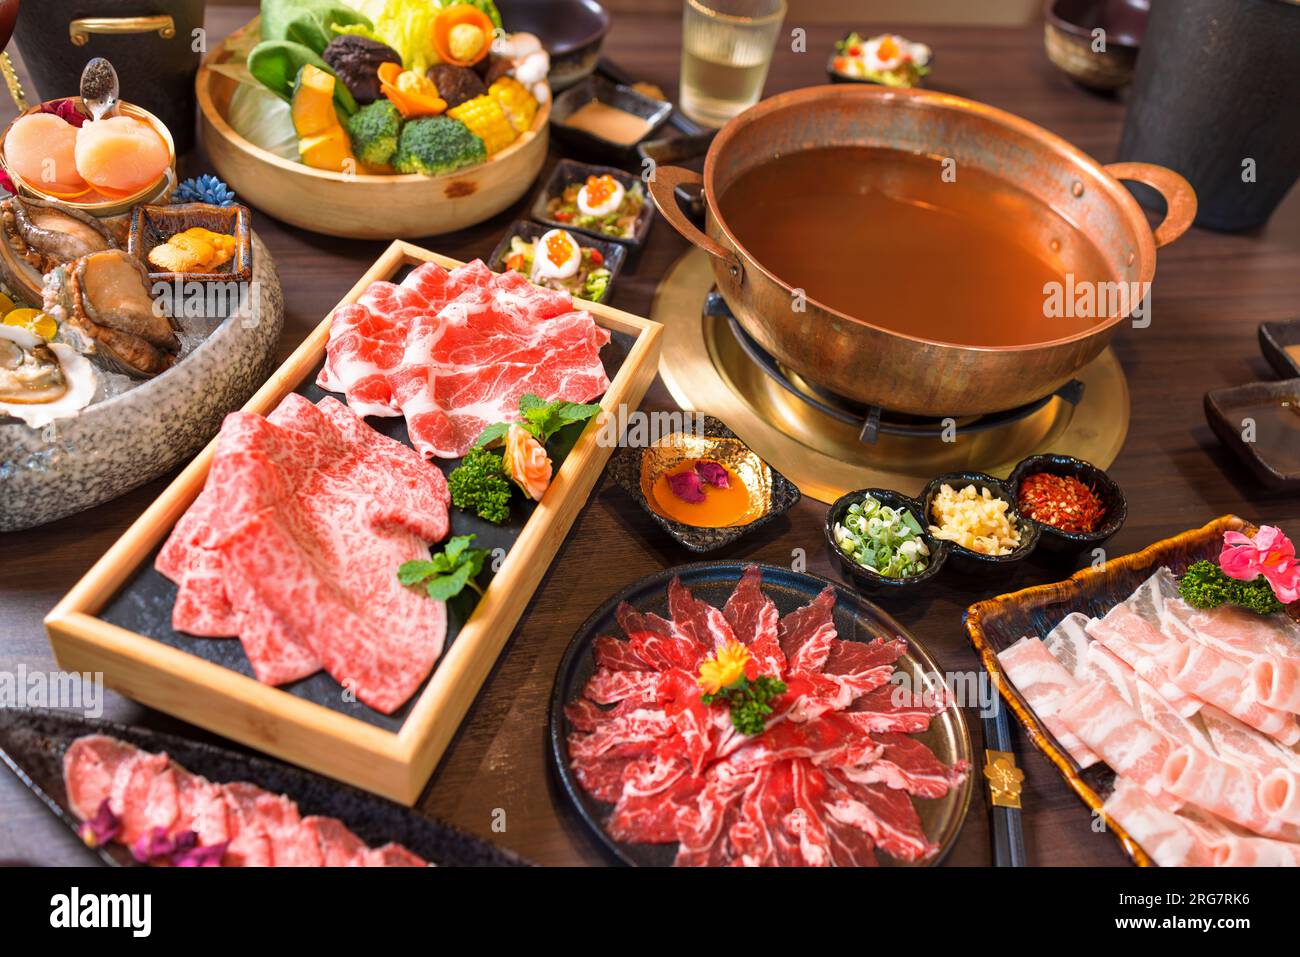 Seafood cuisine plate and beef sliced meat for hot pots. pork slices, scallops,  seashells, oysters, caviar and other seafood delicacies. Stock Photo